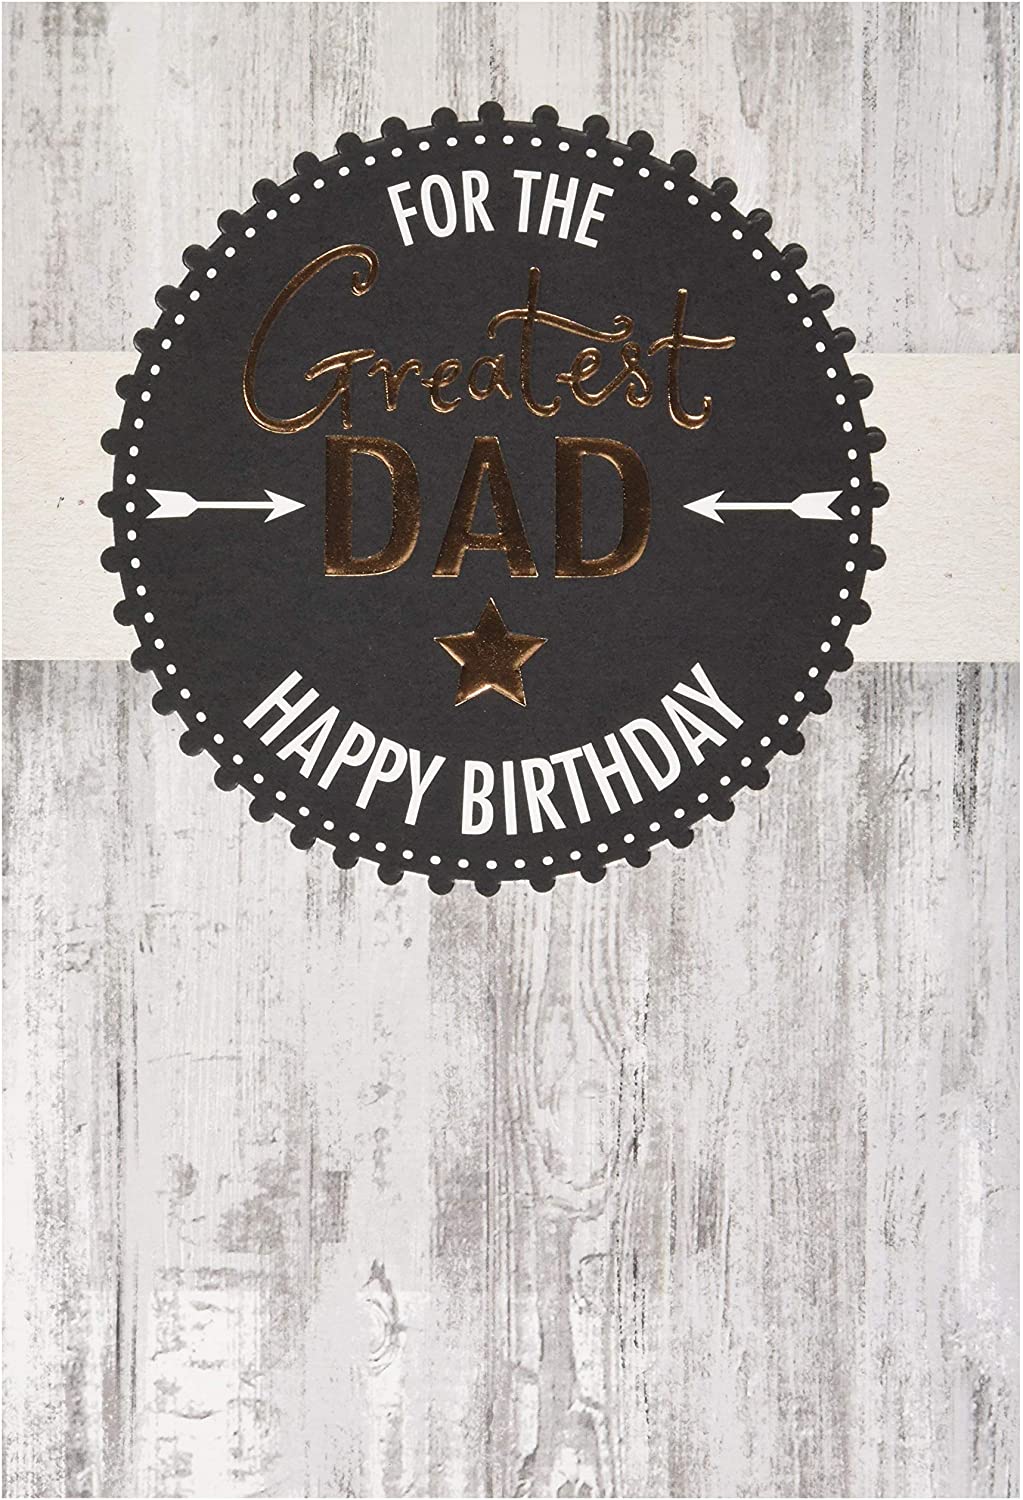 Contemporary Text Based Design Dad Birthday Card